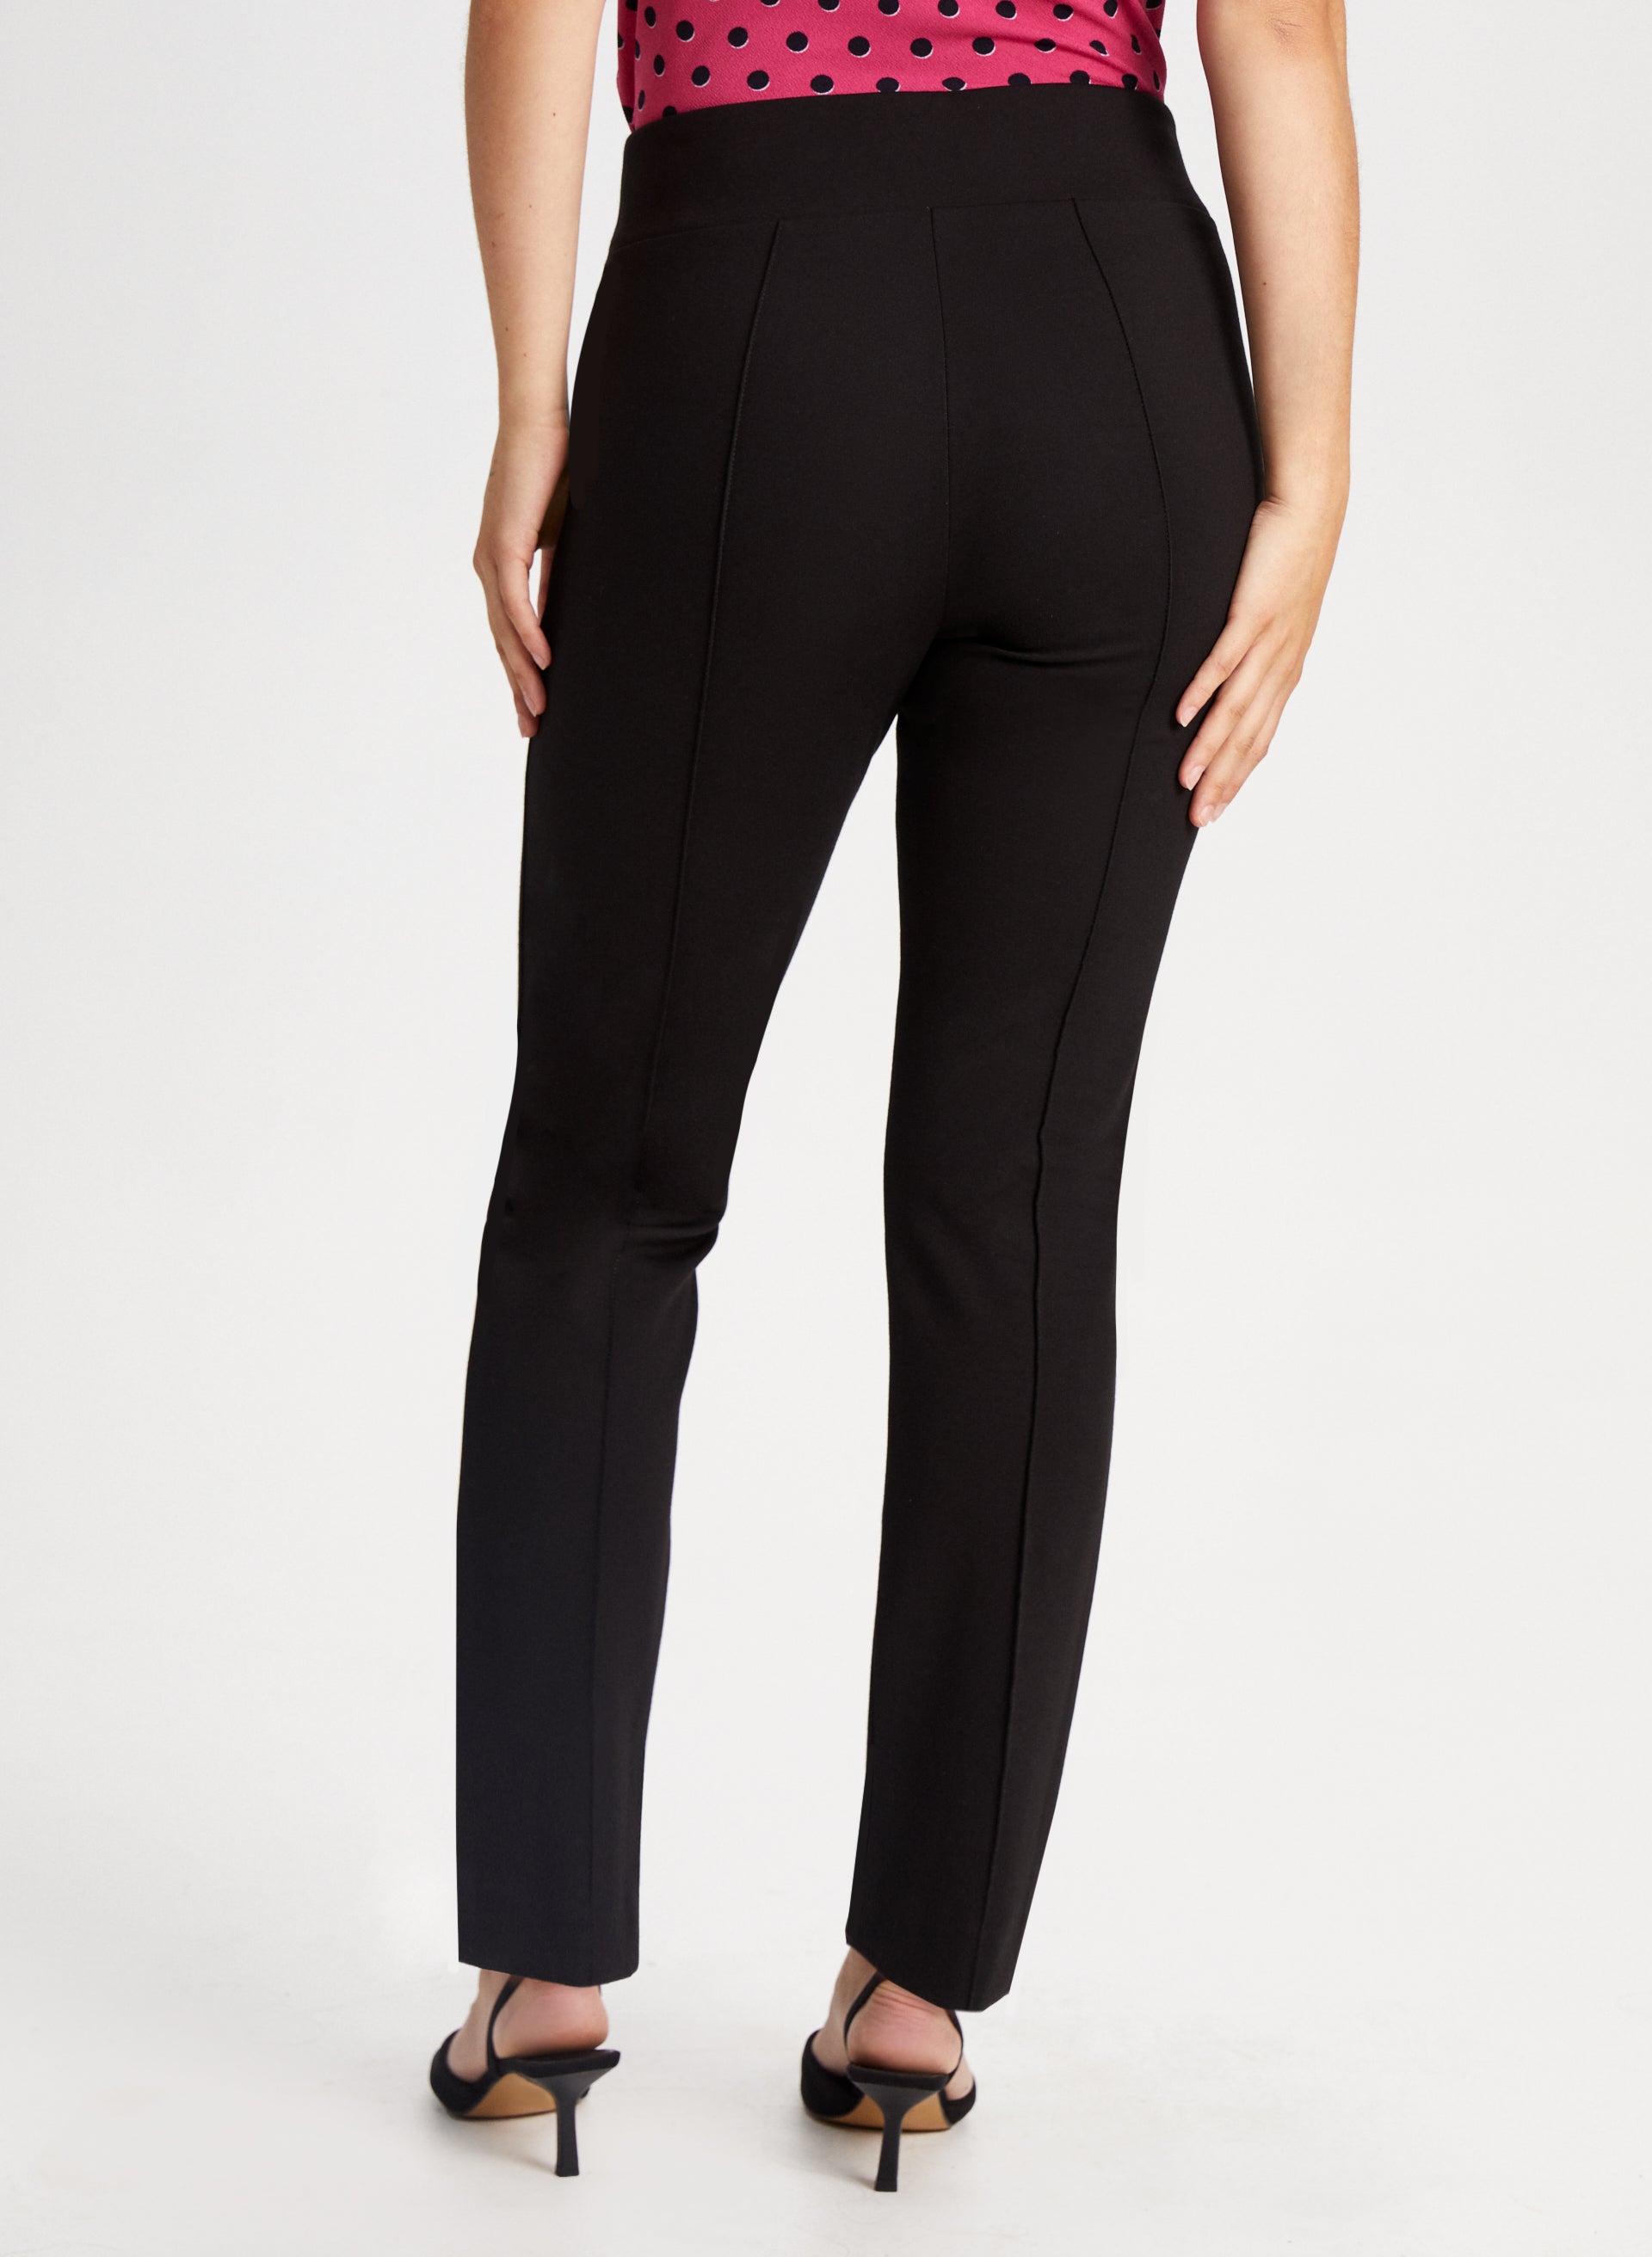 Buy Ponte Button Wide Leg Trousers from the Laura Ashley online shop